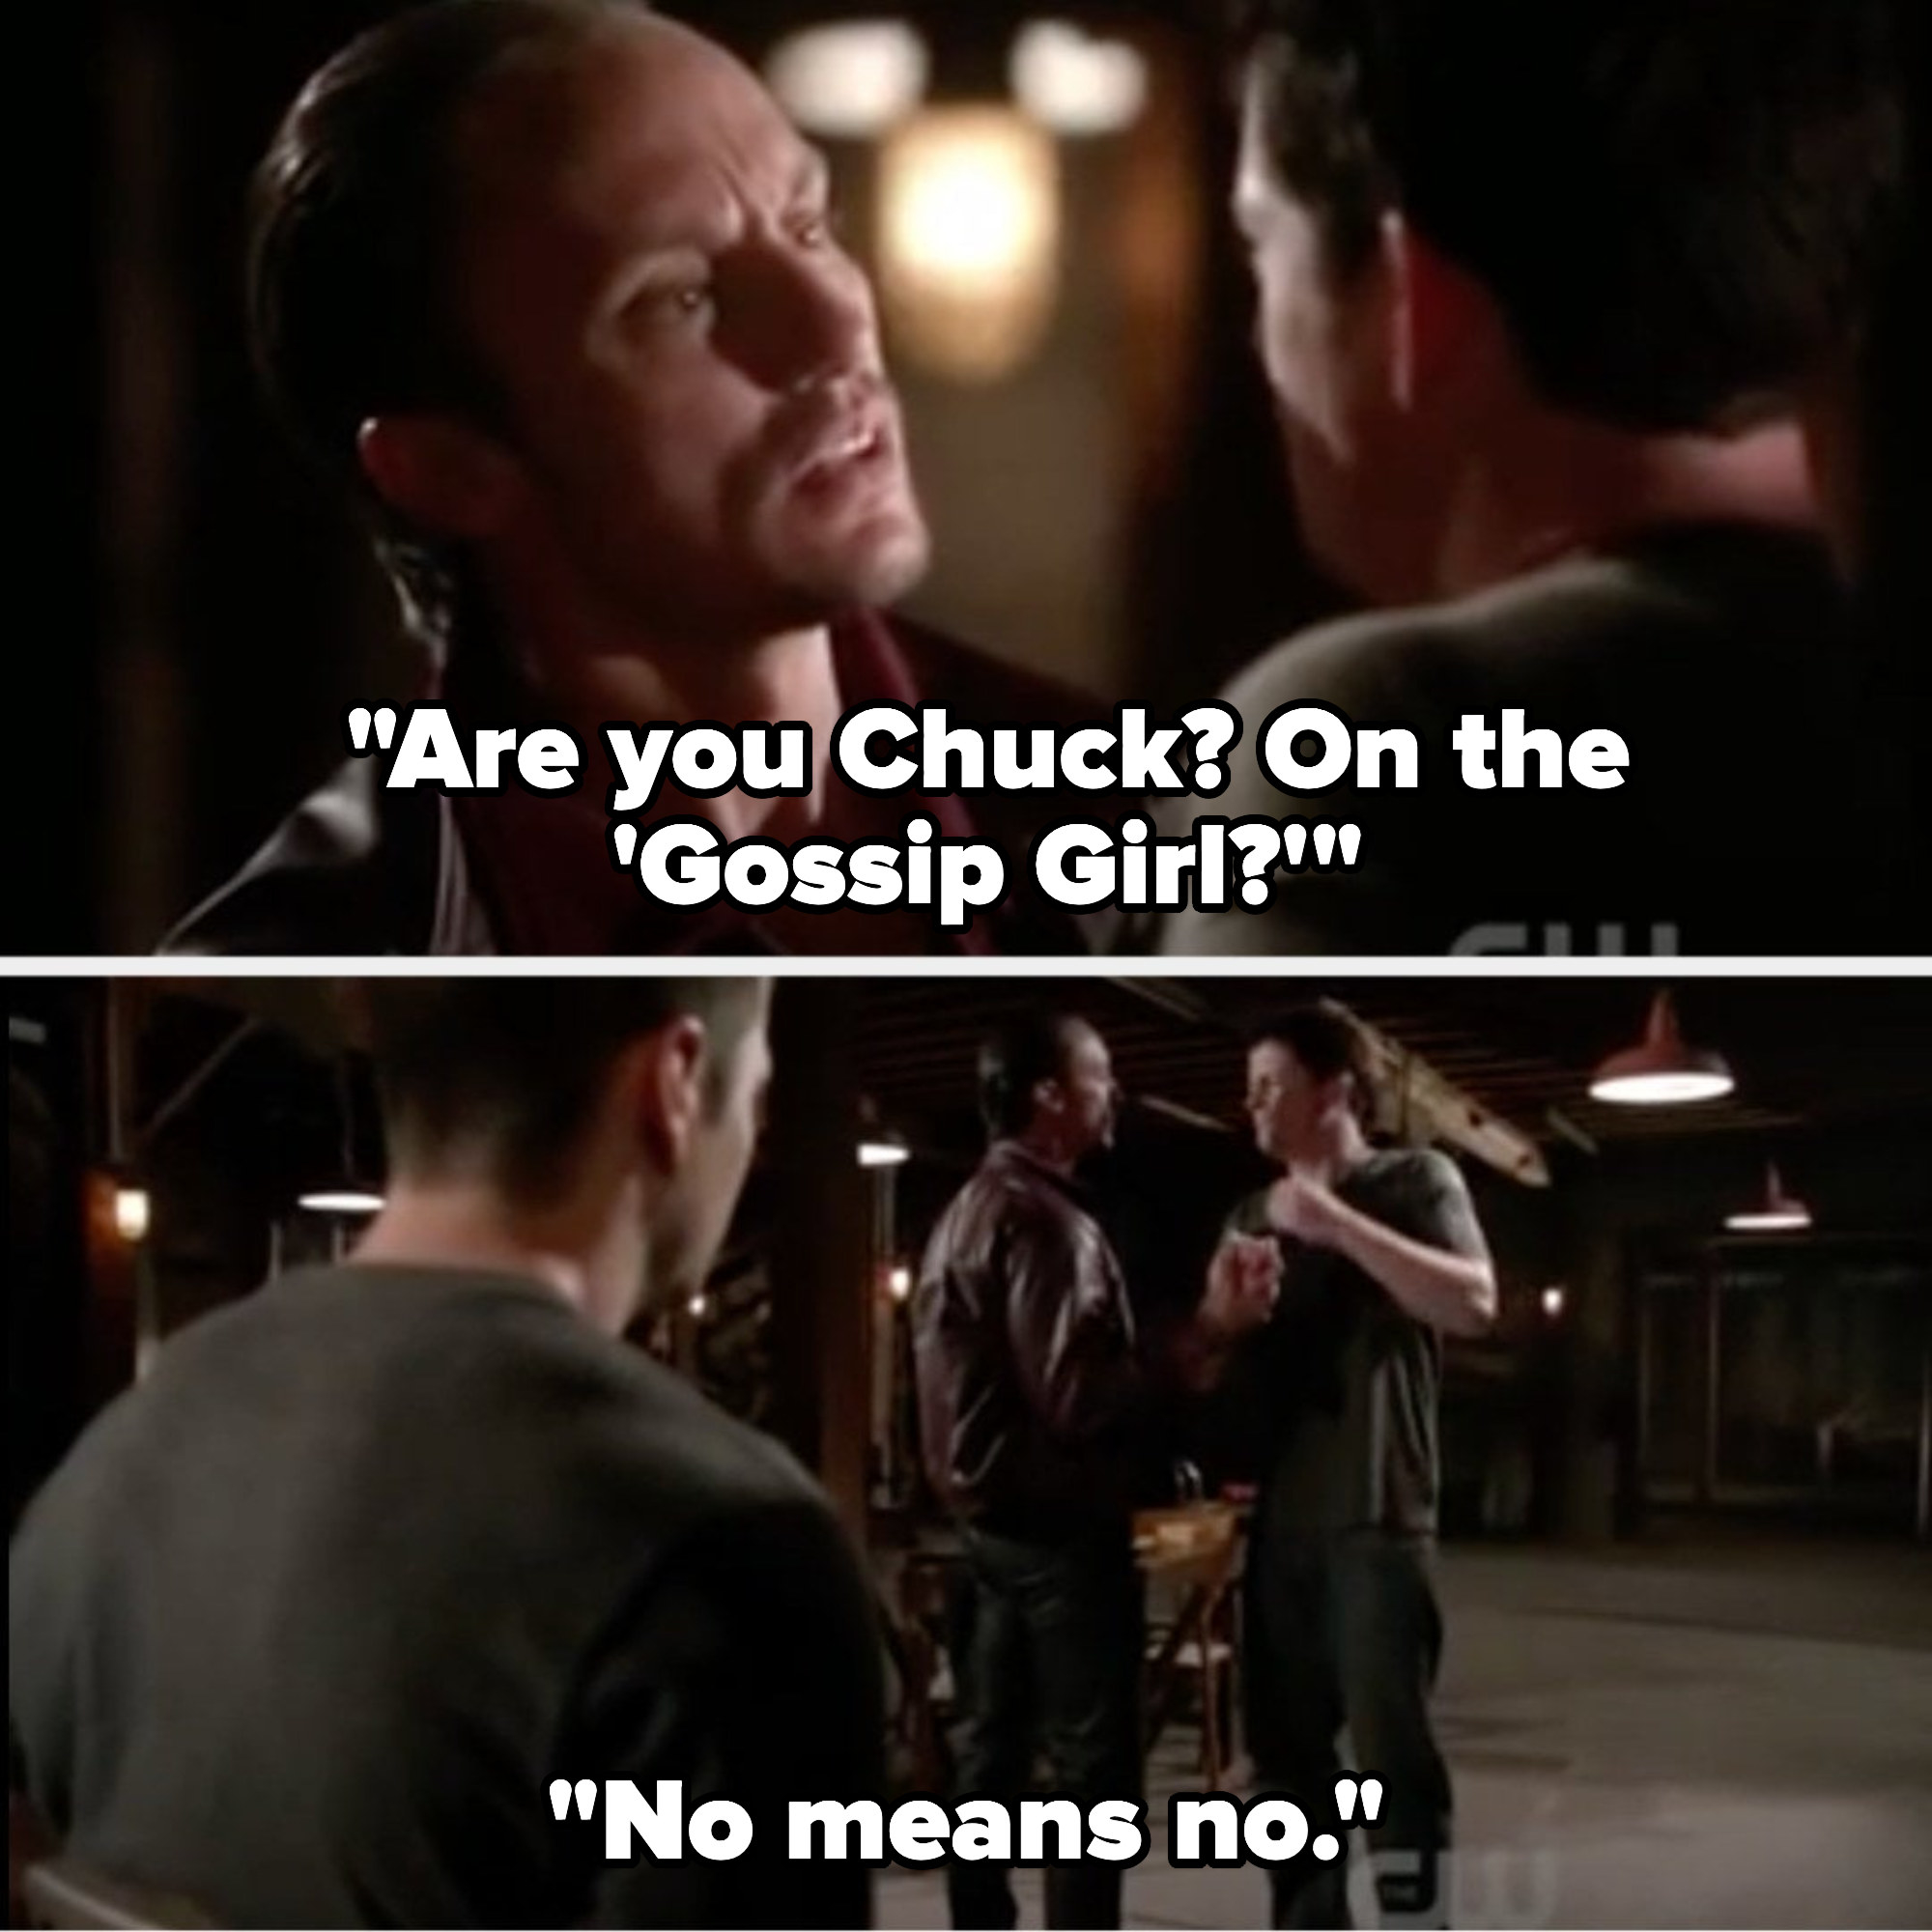 Dmitri says &quot;Are you Chuck? On the &#x27;Gossip Girl?&#x27; No means no&quot;